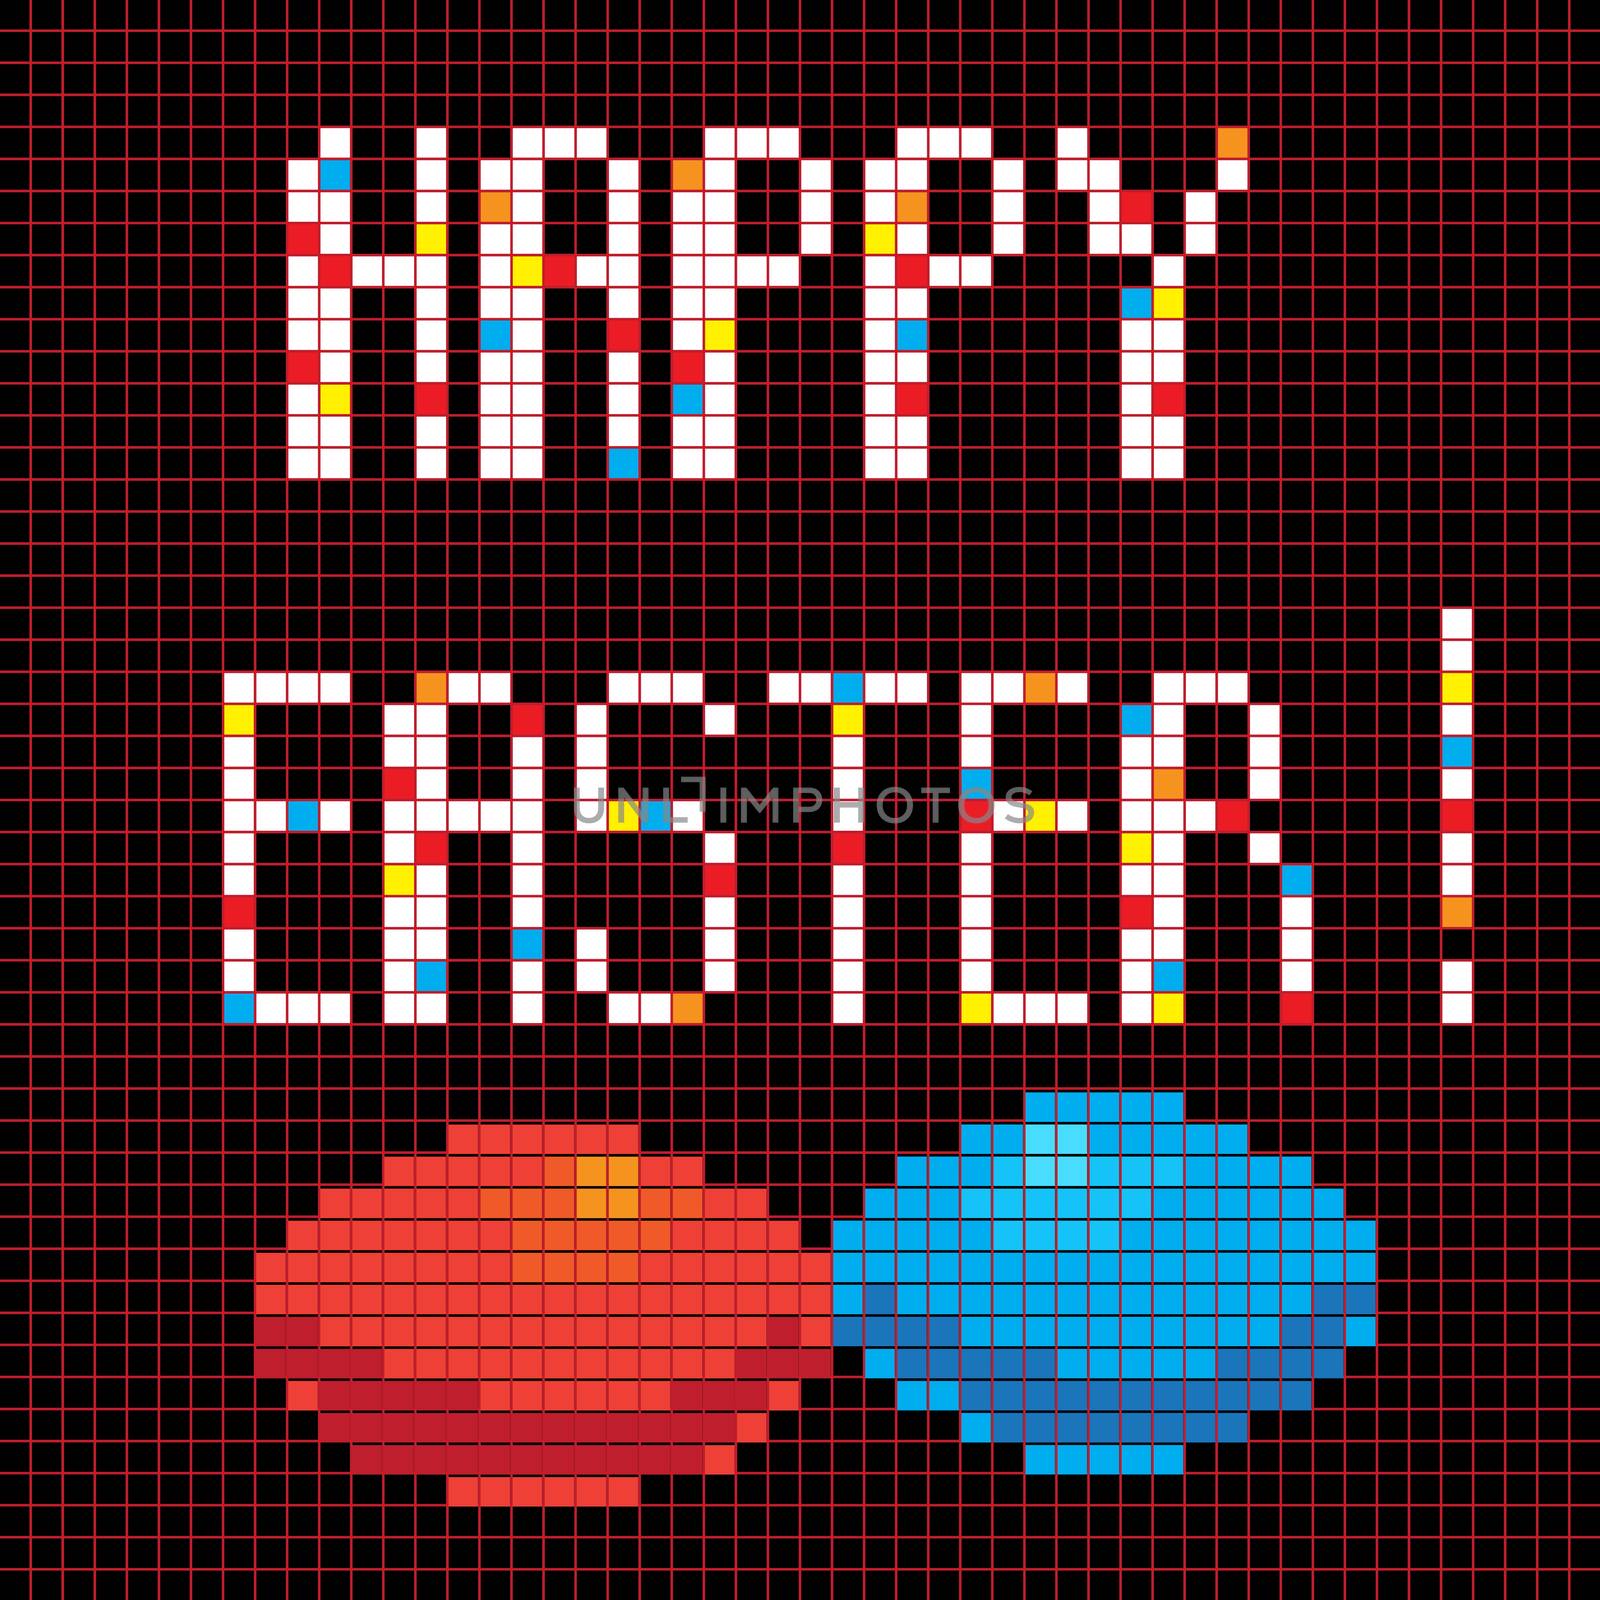 Easter greetings card, pixel illustration of a scoreboard composition with digital text